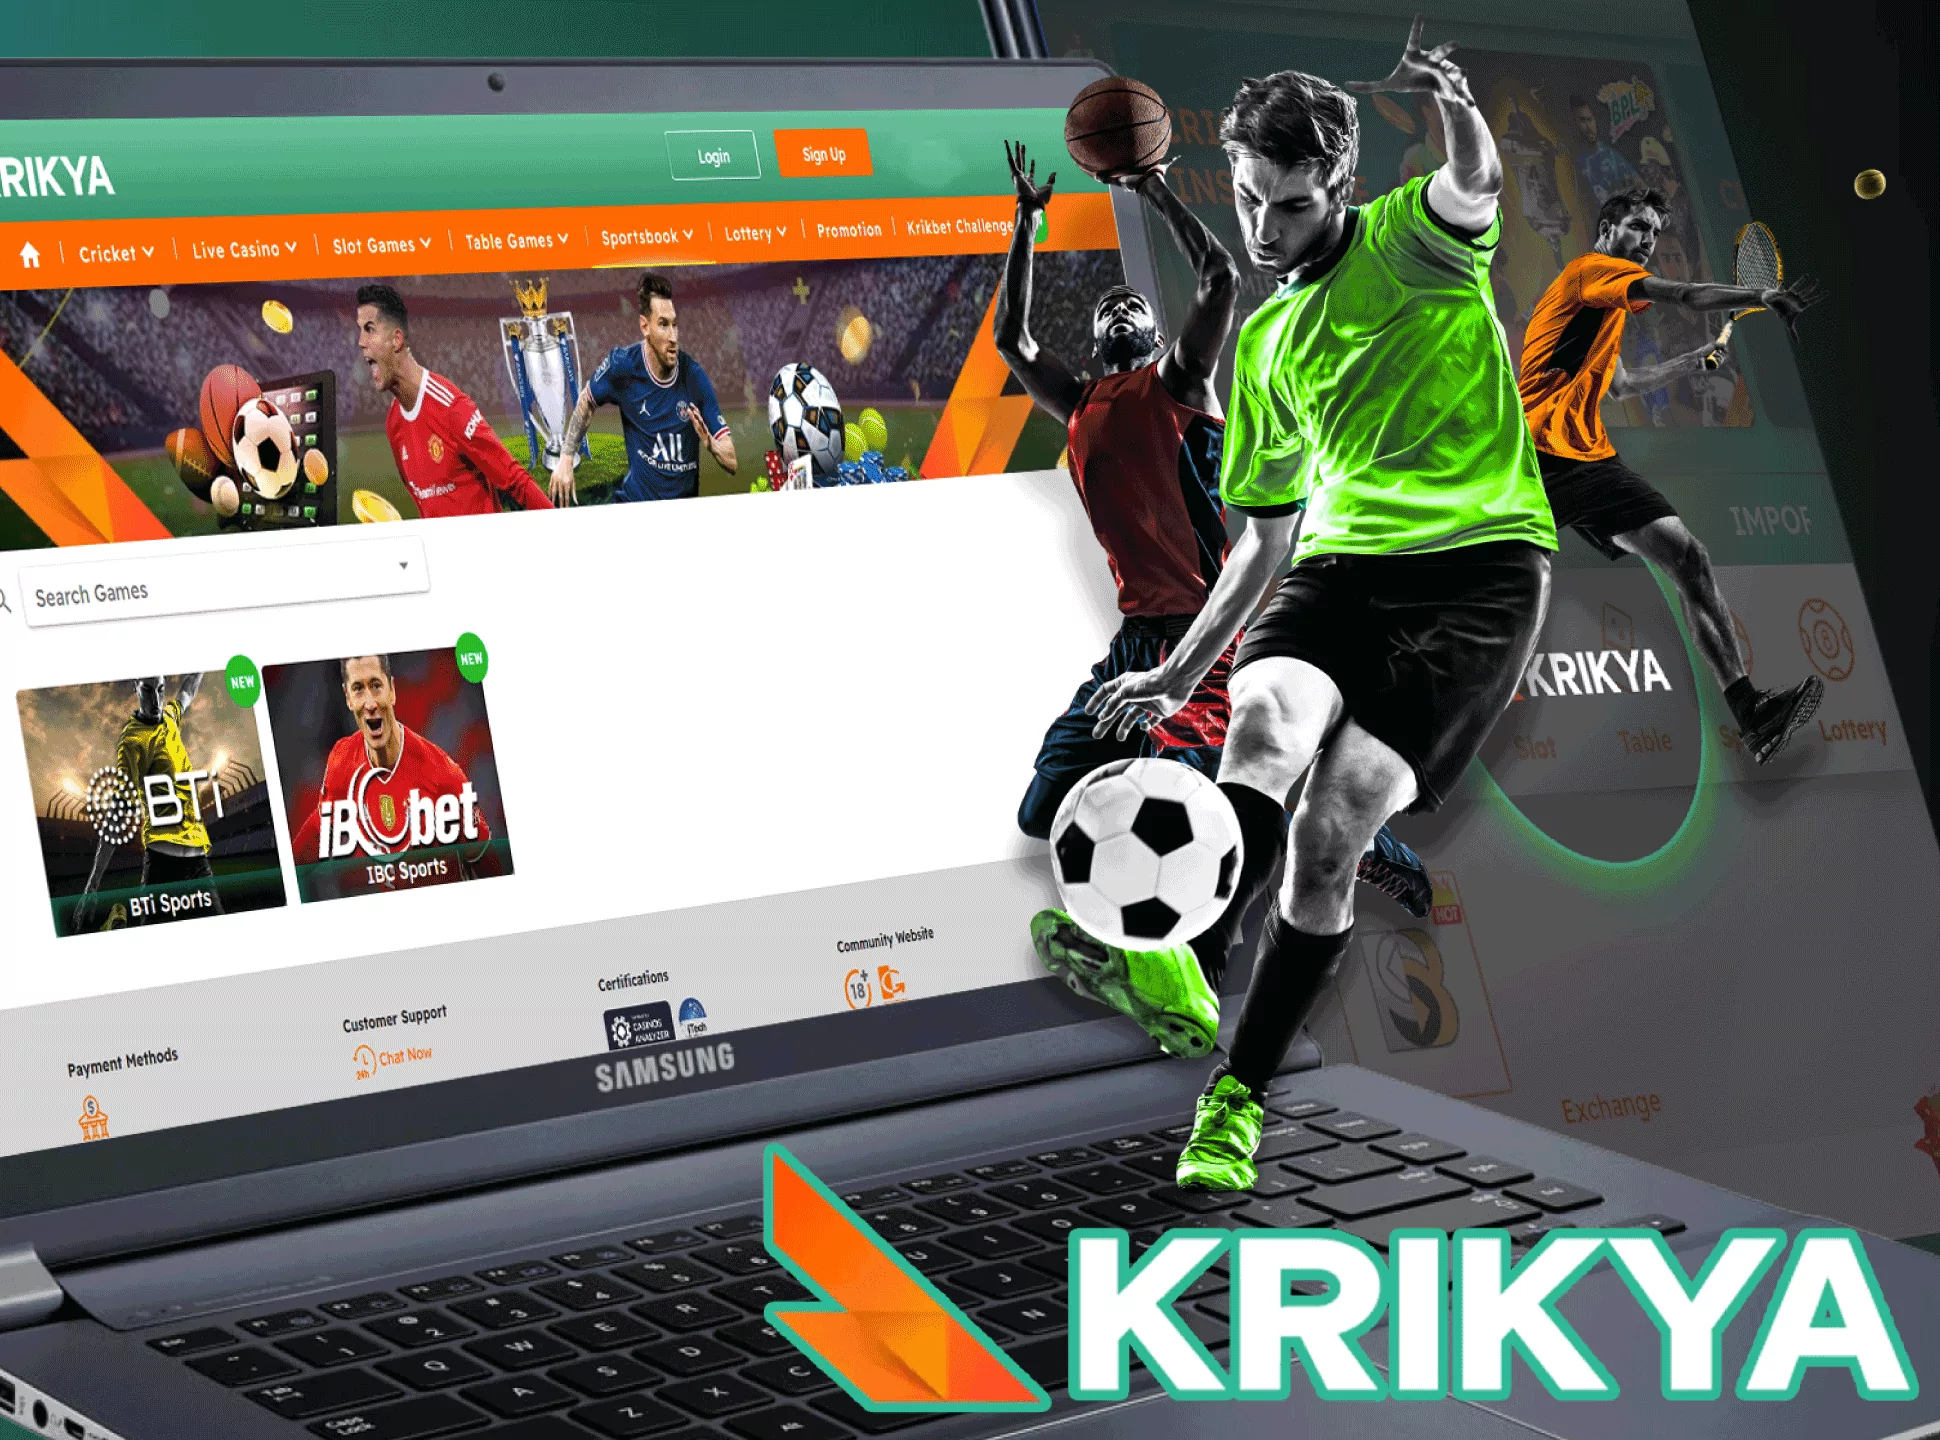 Krikya has a wide range of sports disciplines that you can bet on.